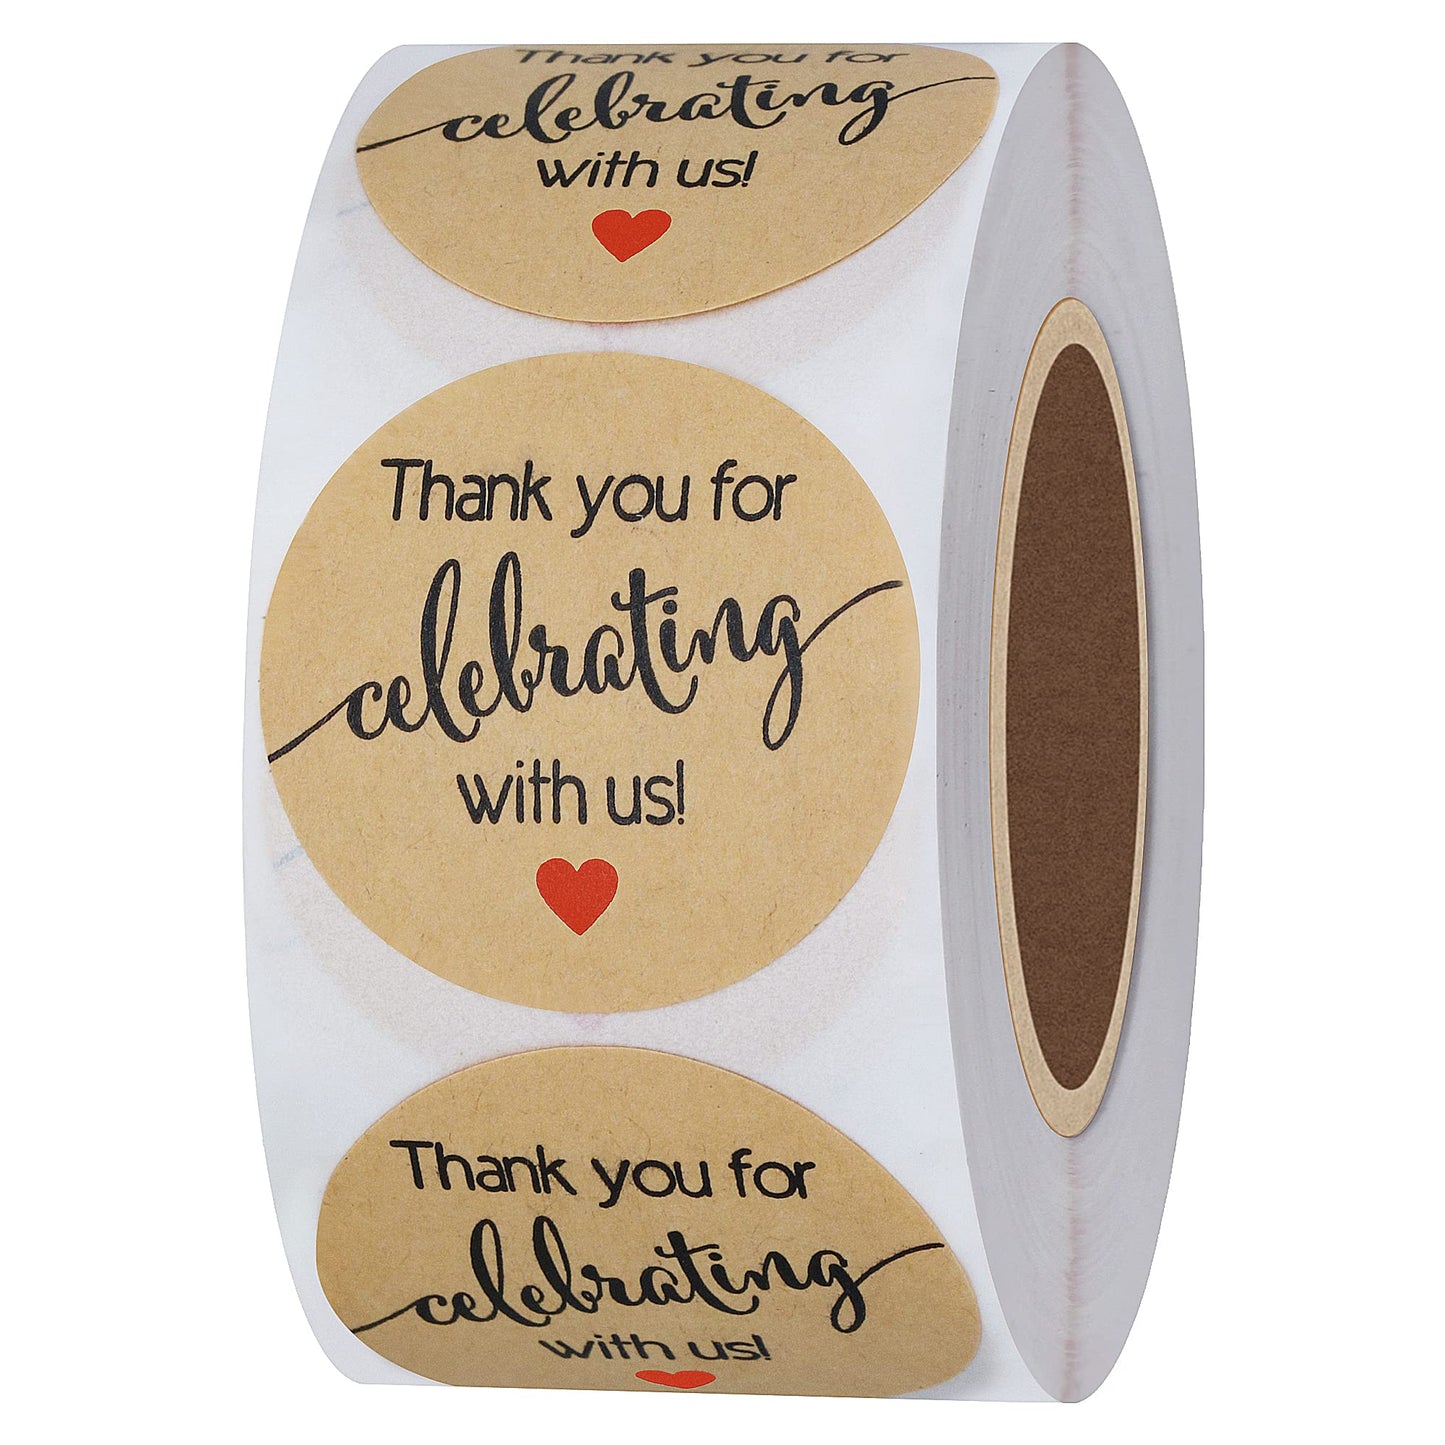 Hybsk Purple Thank You for Celebrating with Us Stickers 1.5" Round Total 500 Labels Per Roll